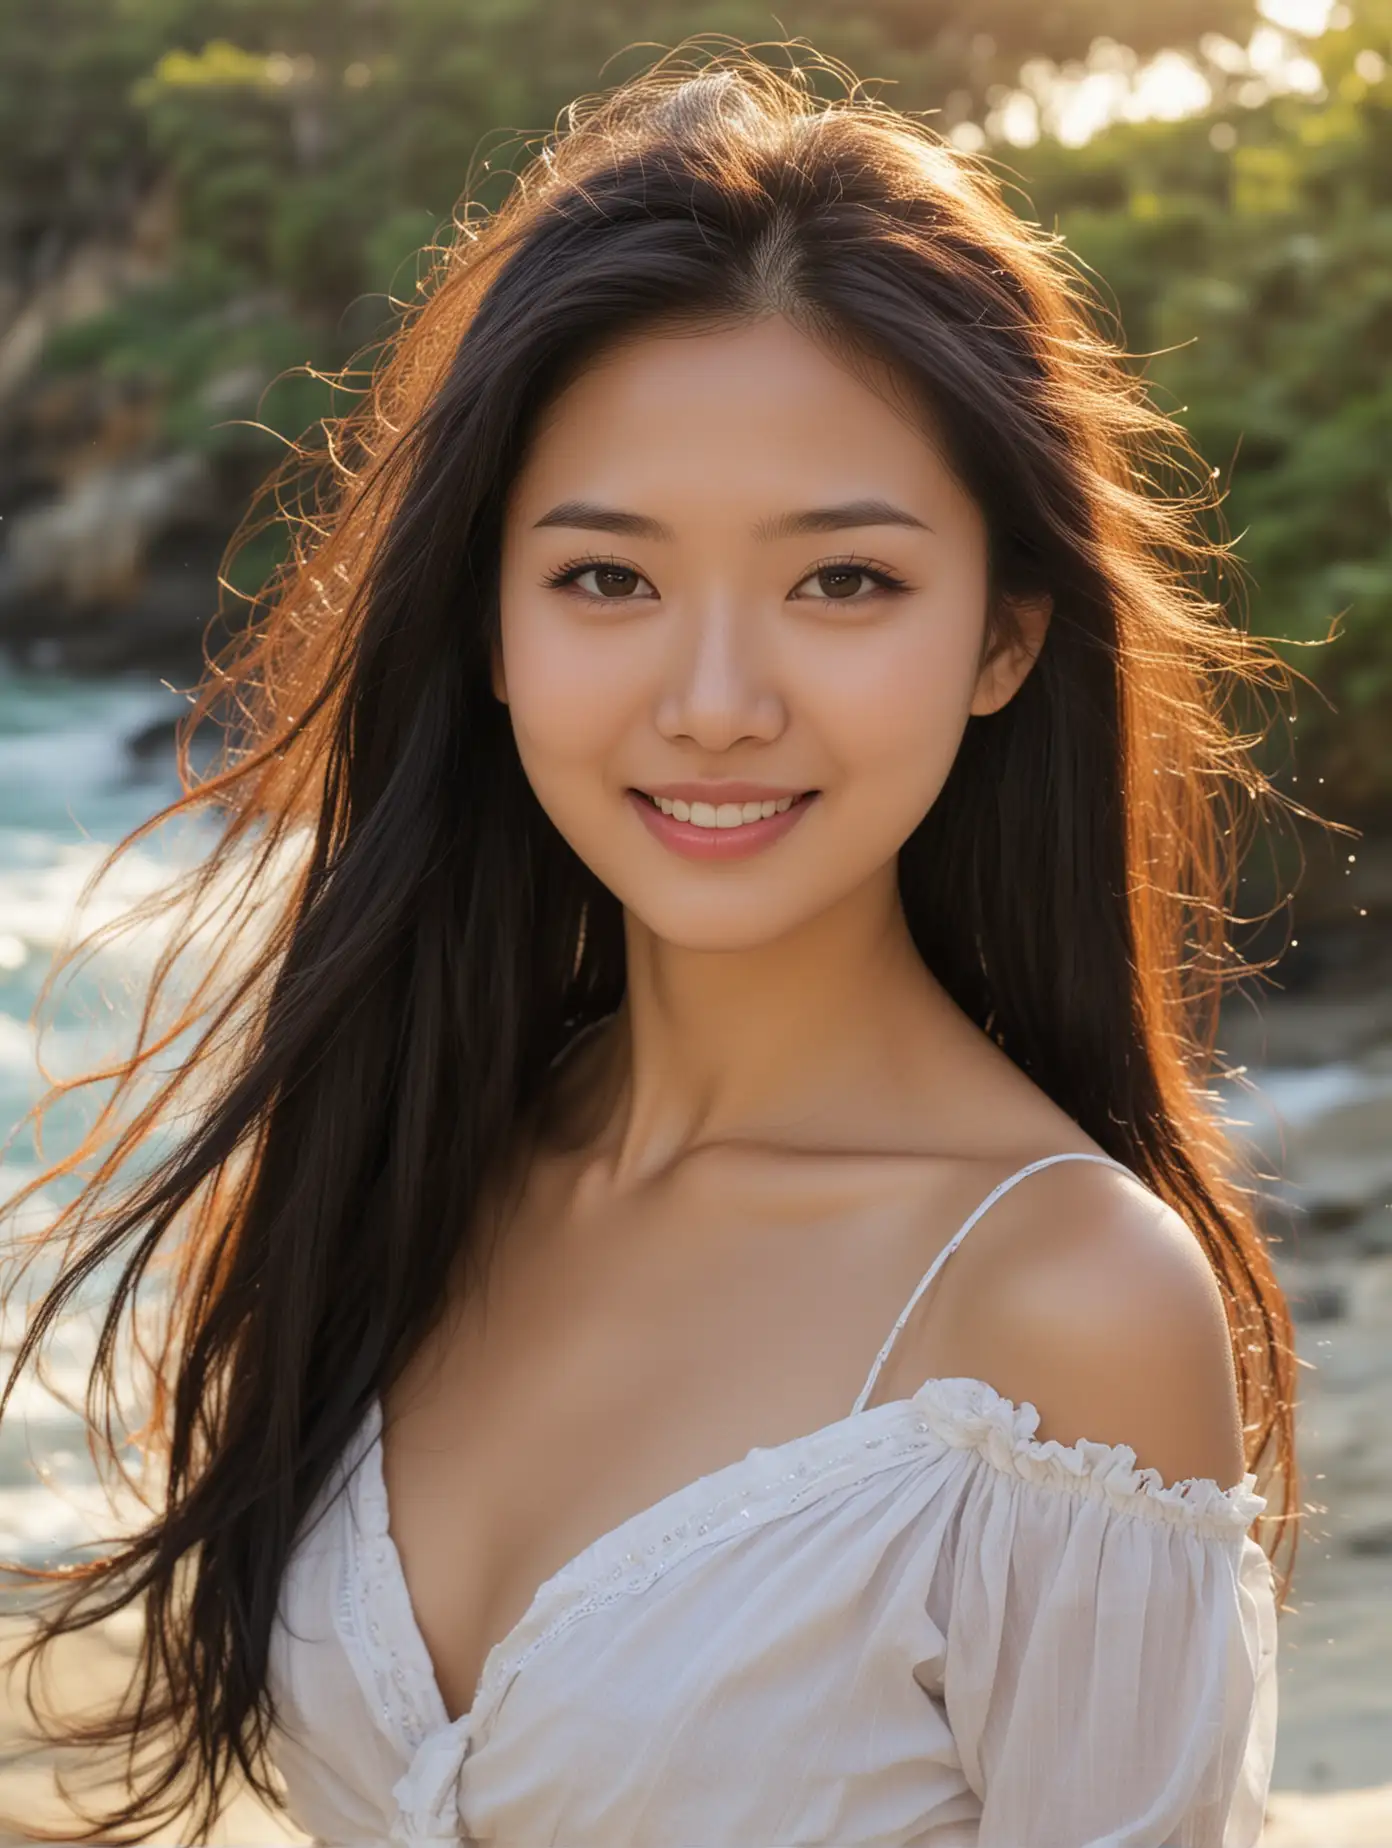 very beautiful, sun-kissed, and sexy Chinese girl in her twenties, with a natural smile on her face, looking dreamy and alluring. She has smooth, radiant skin, long, silky black hair that flows gracefully, and sparkling eyes that convey warmth and charm. She is standing in a sunlit outdoor setting, perhaps a park or a beach, with vibrant, lush greenery or serene ocean waves in the background, adding to her enchanting and captivating appearance.